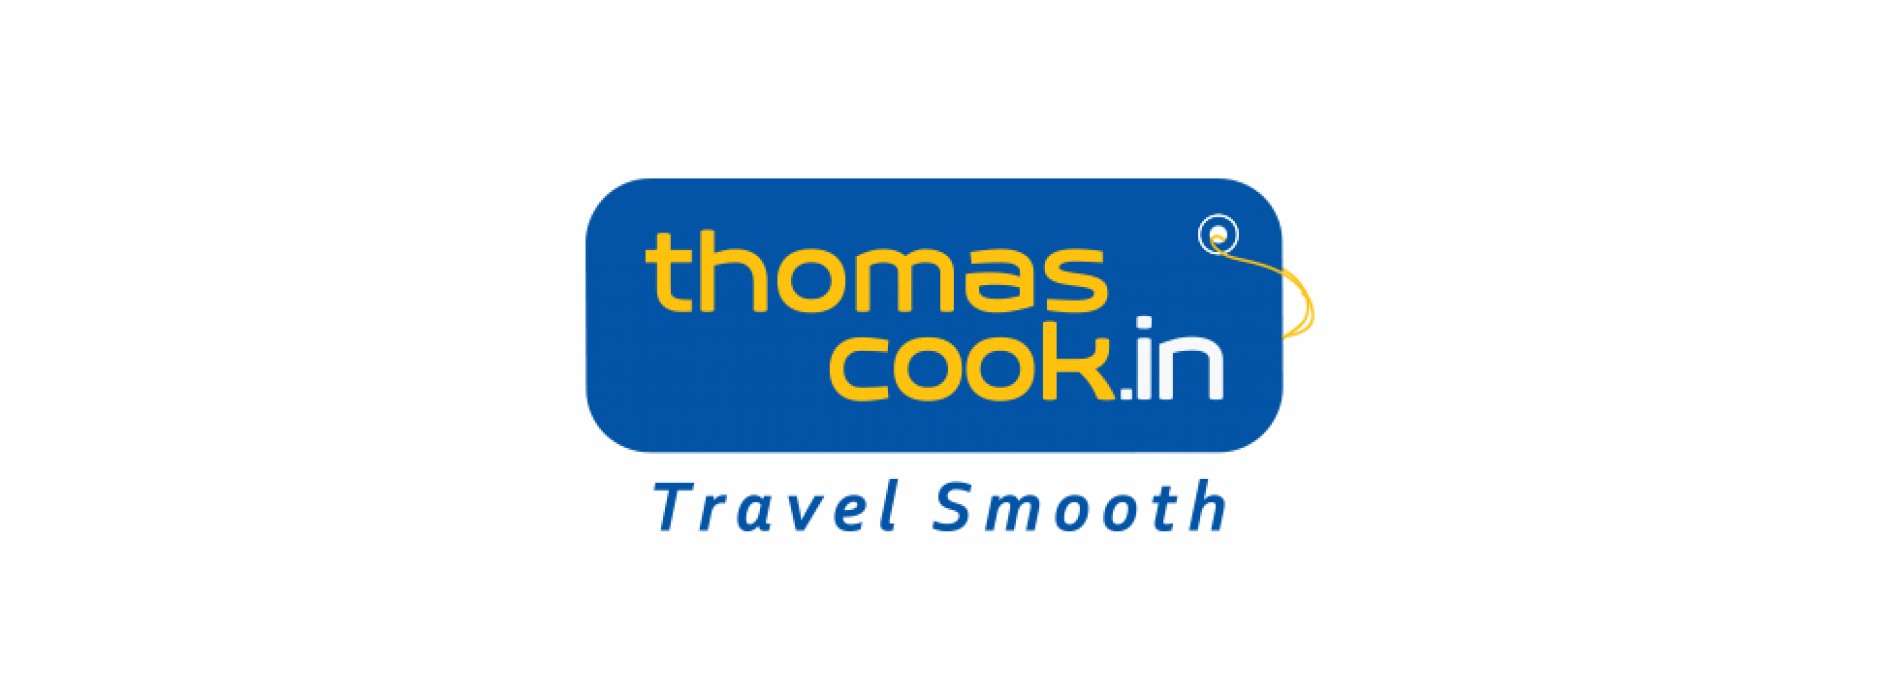 Thomas Cook India honoured with Best Risk Management Award